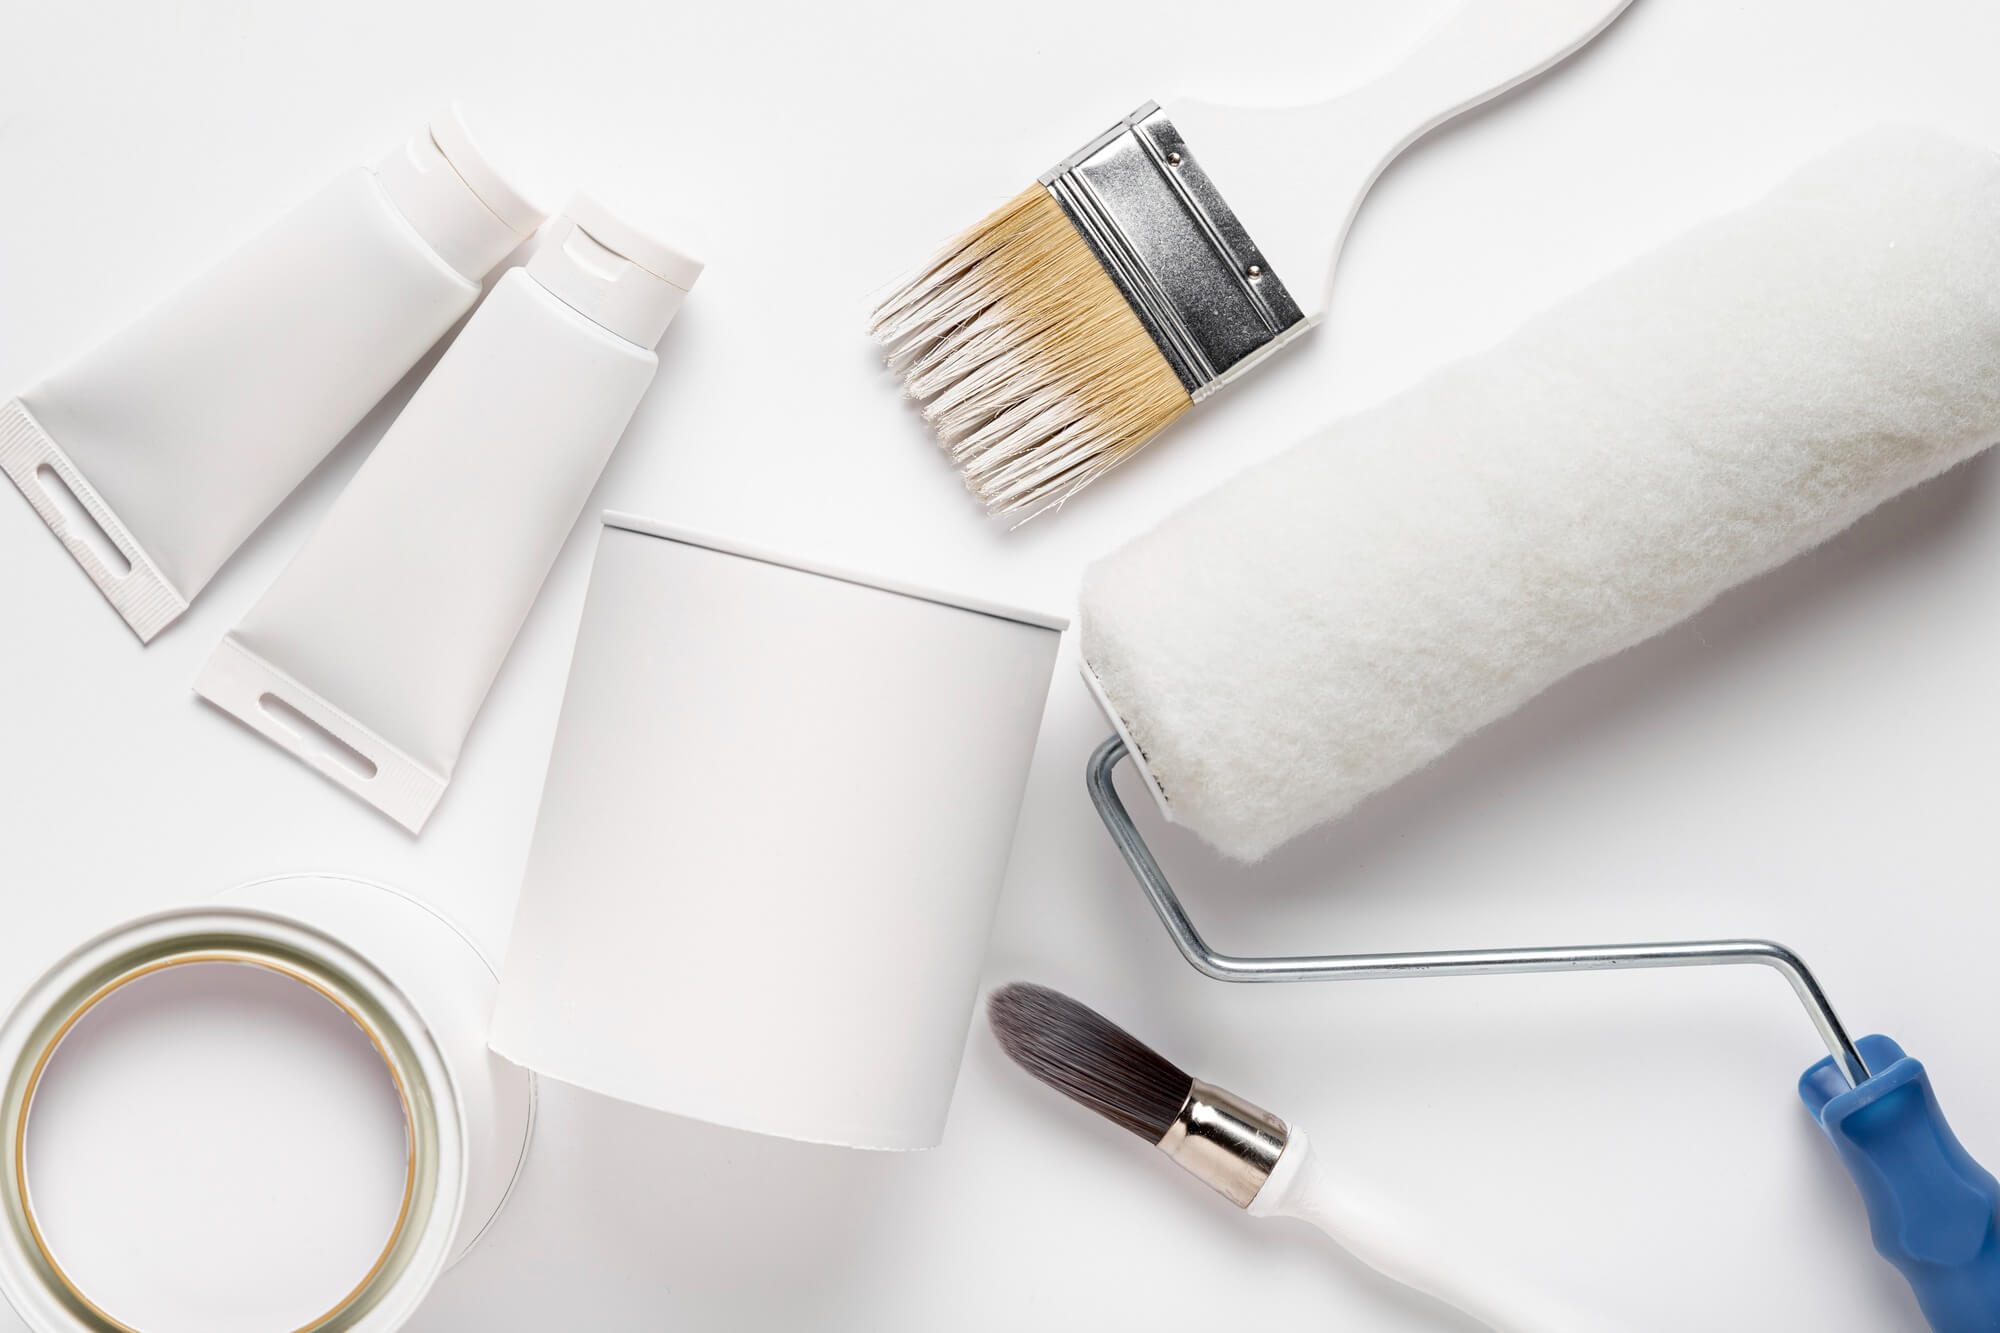 Choose High-quality Paint and Materials